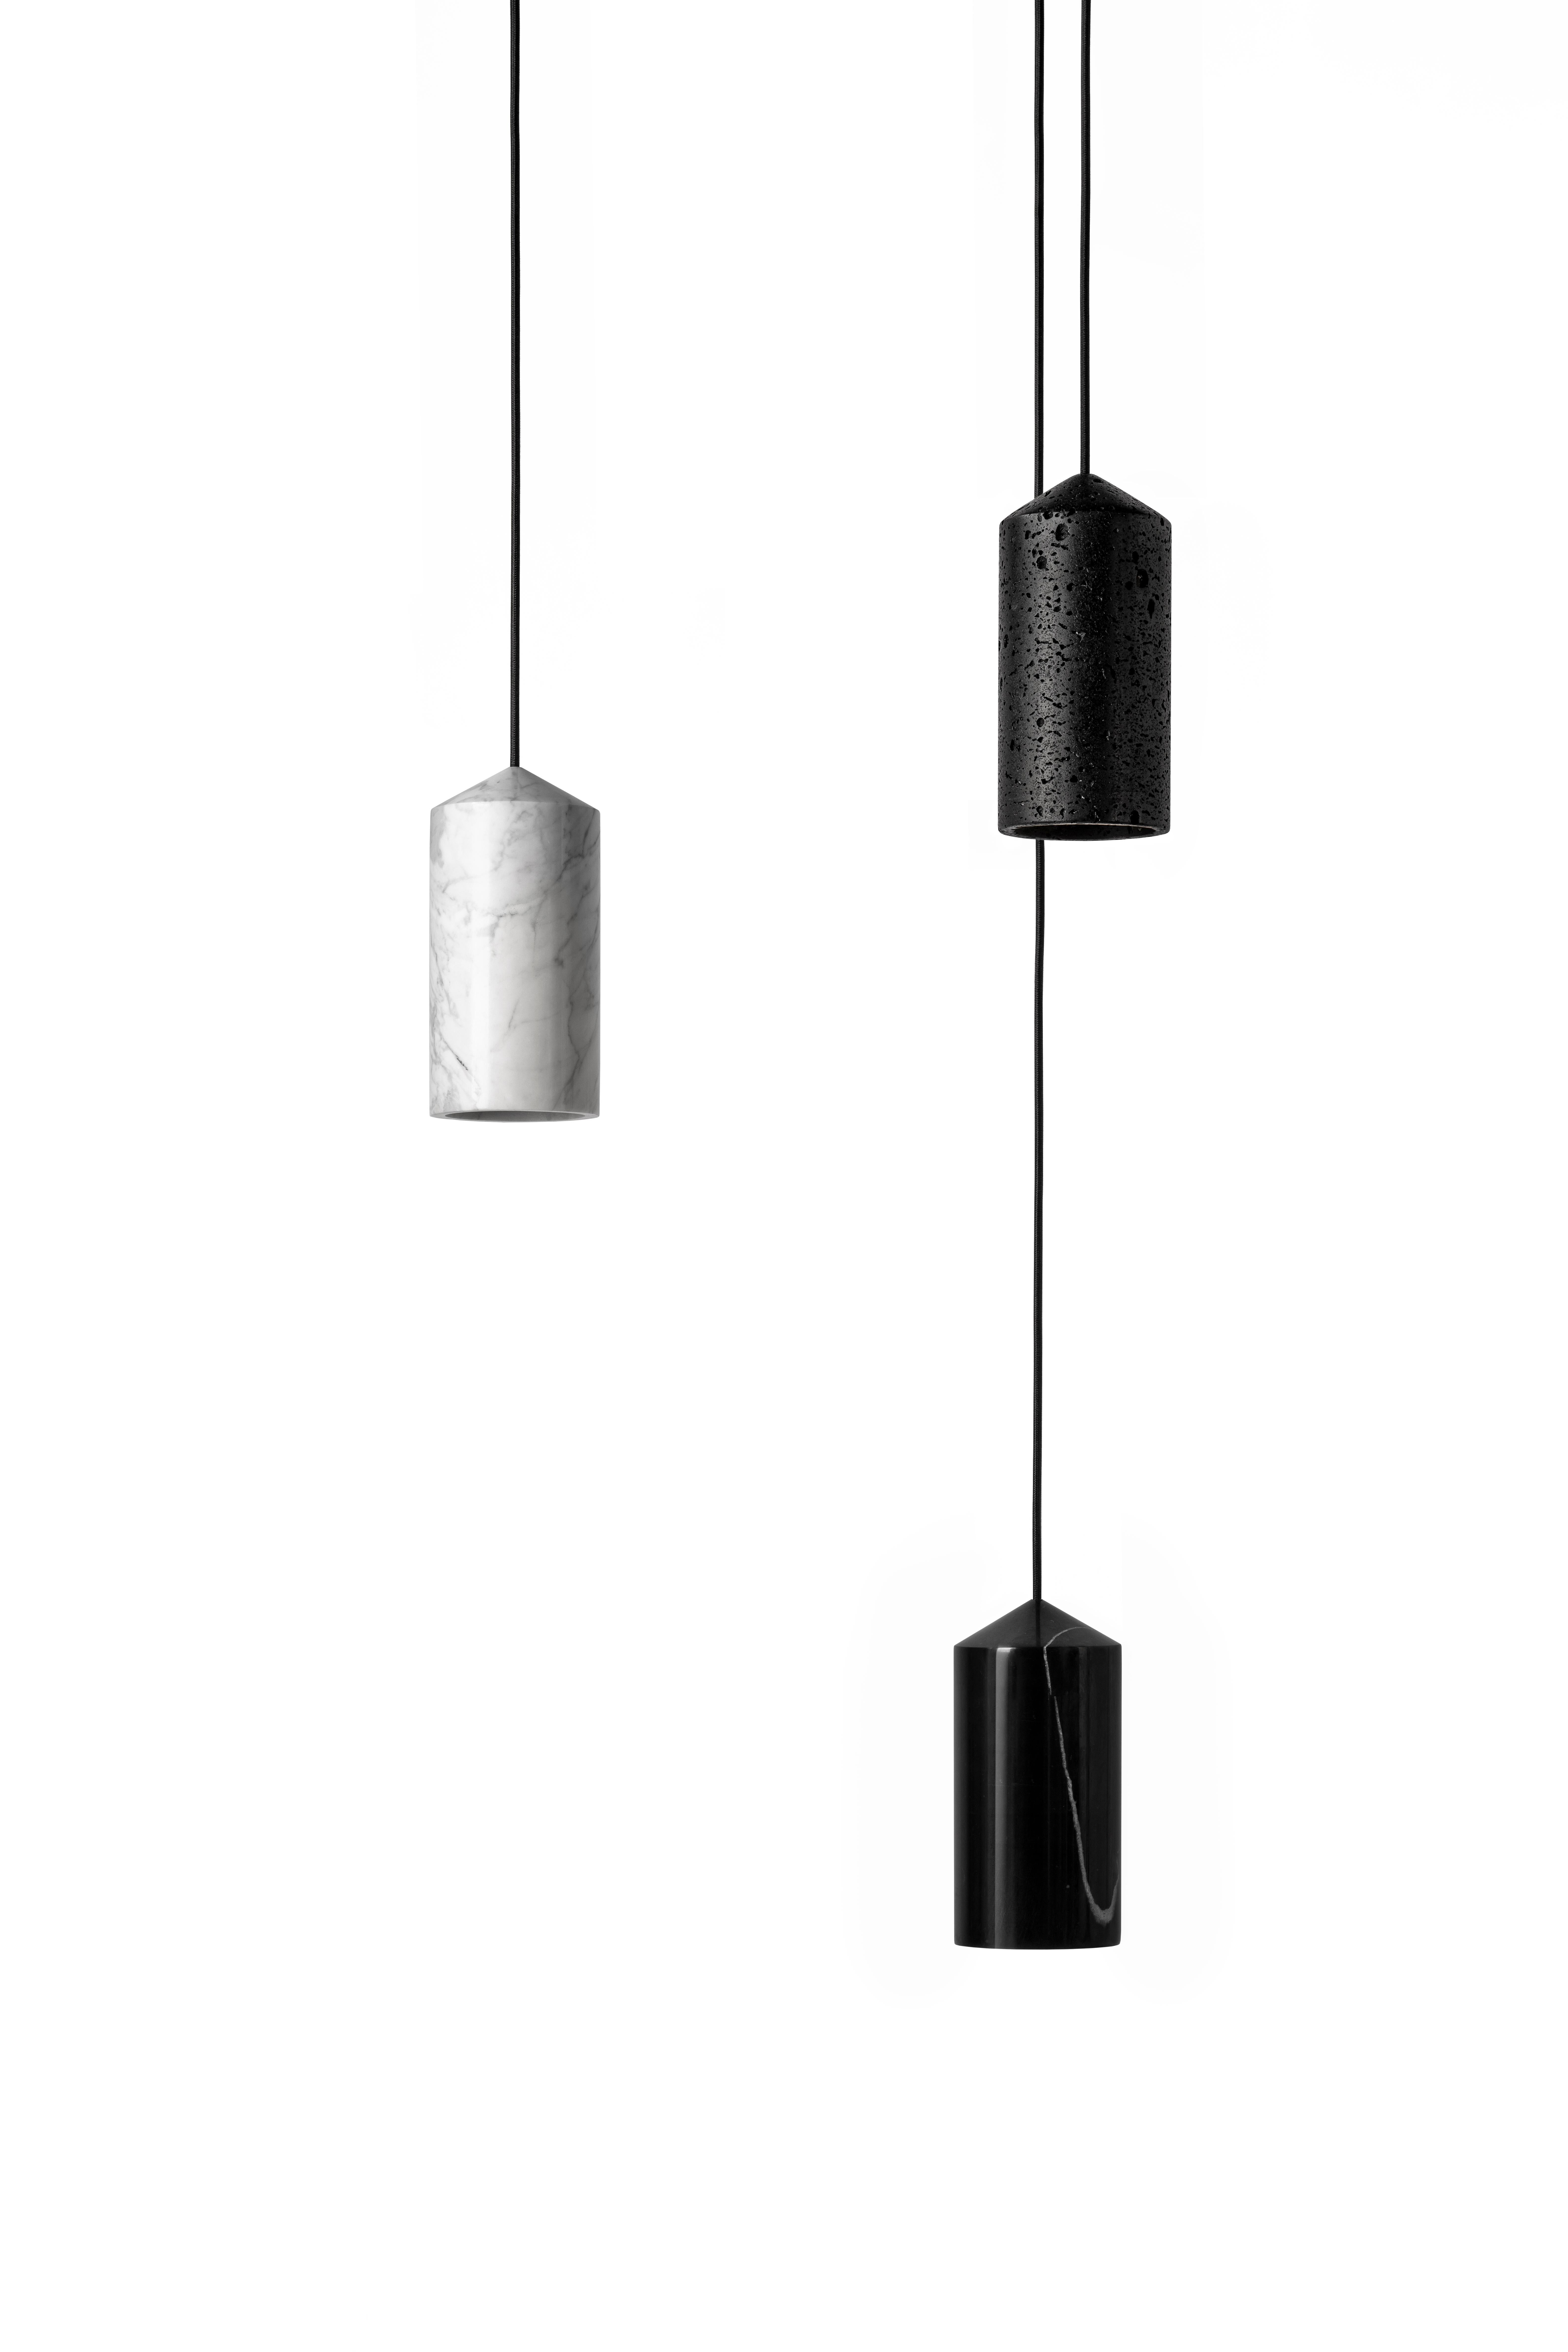 Pendant lamp 'IN' by Buzao x Bentu design.
Black marble

Measures: 23 cm high, 11 cm diameter
Wire: 2 meters black (adjustable)
Lamp type: E27 LED 3W 100-240V 80Ra 200LM 2700K - Comptable with US electric system.
Ceiling rose 6.5cm diameter